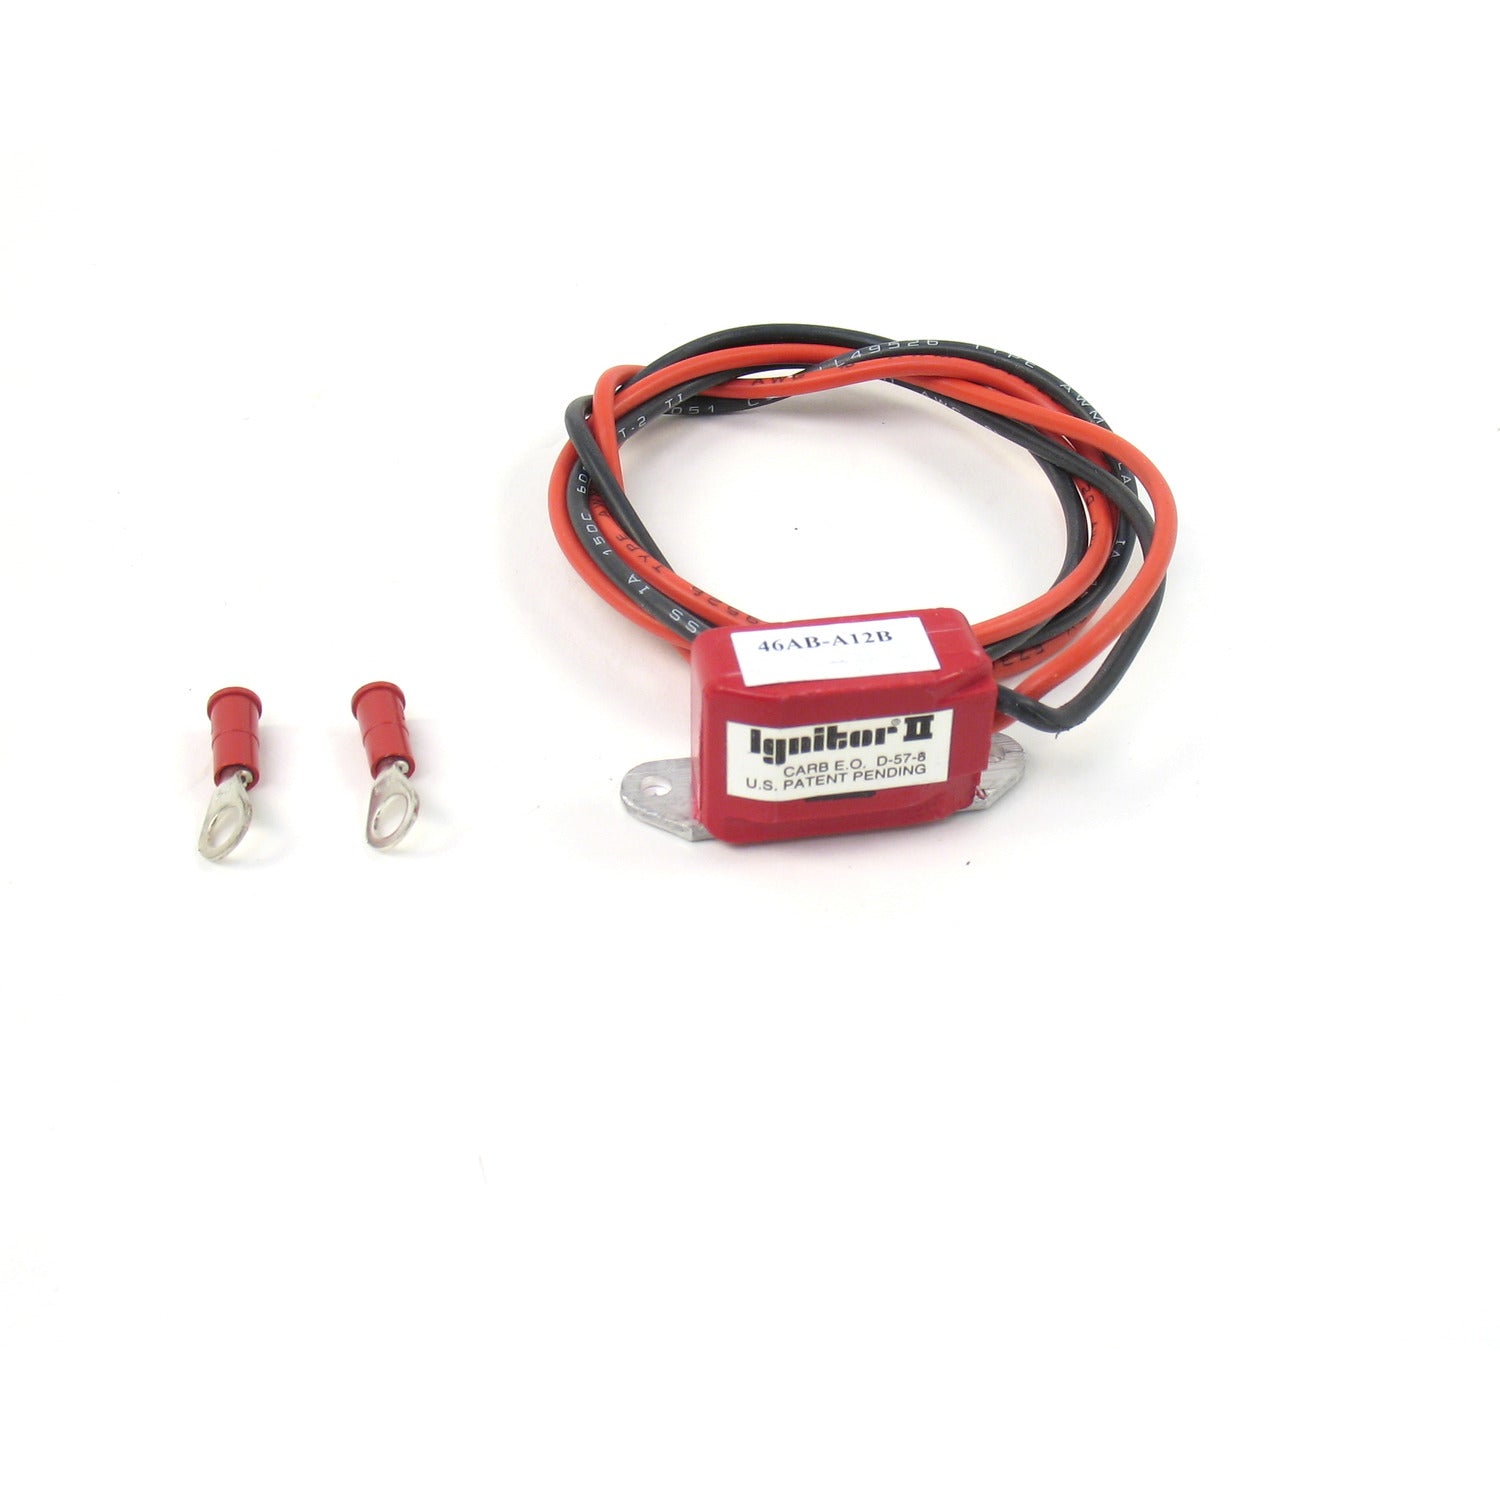 PerTronix D500704 Module (replacement) Ignitor II for PerTronix Flame-Thrower Rover V8 Distributor